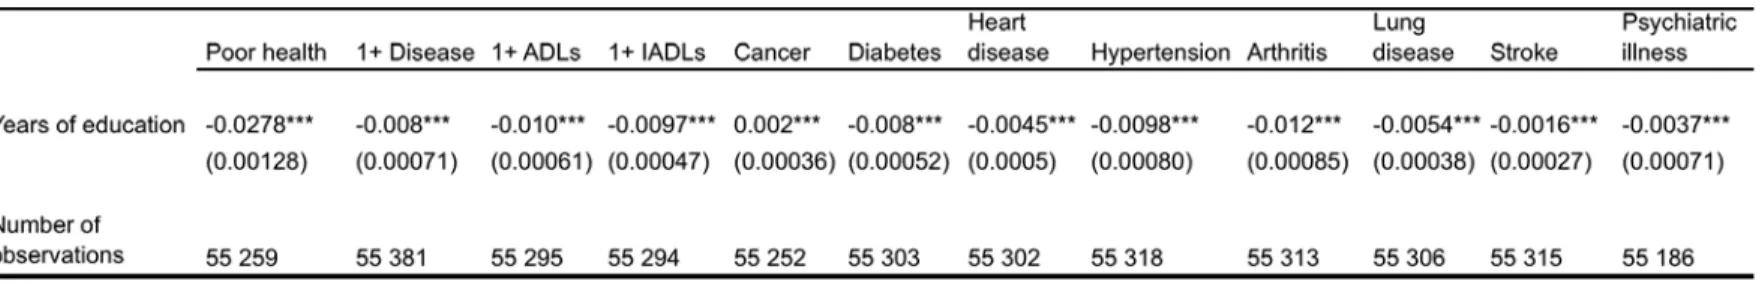 Table 5. Probit models: effect of years of education on health outcomes (Coefficients reported as marginal effects) 